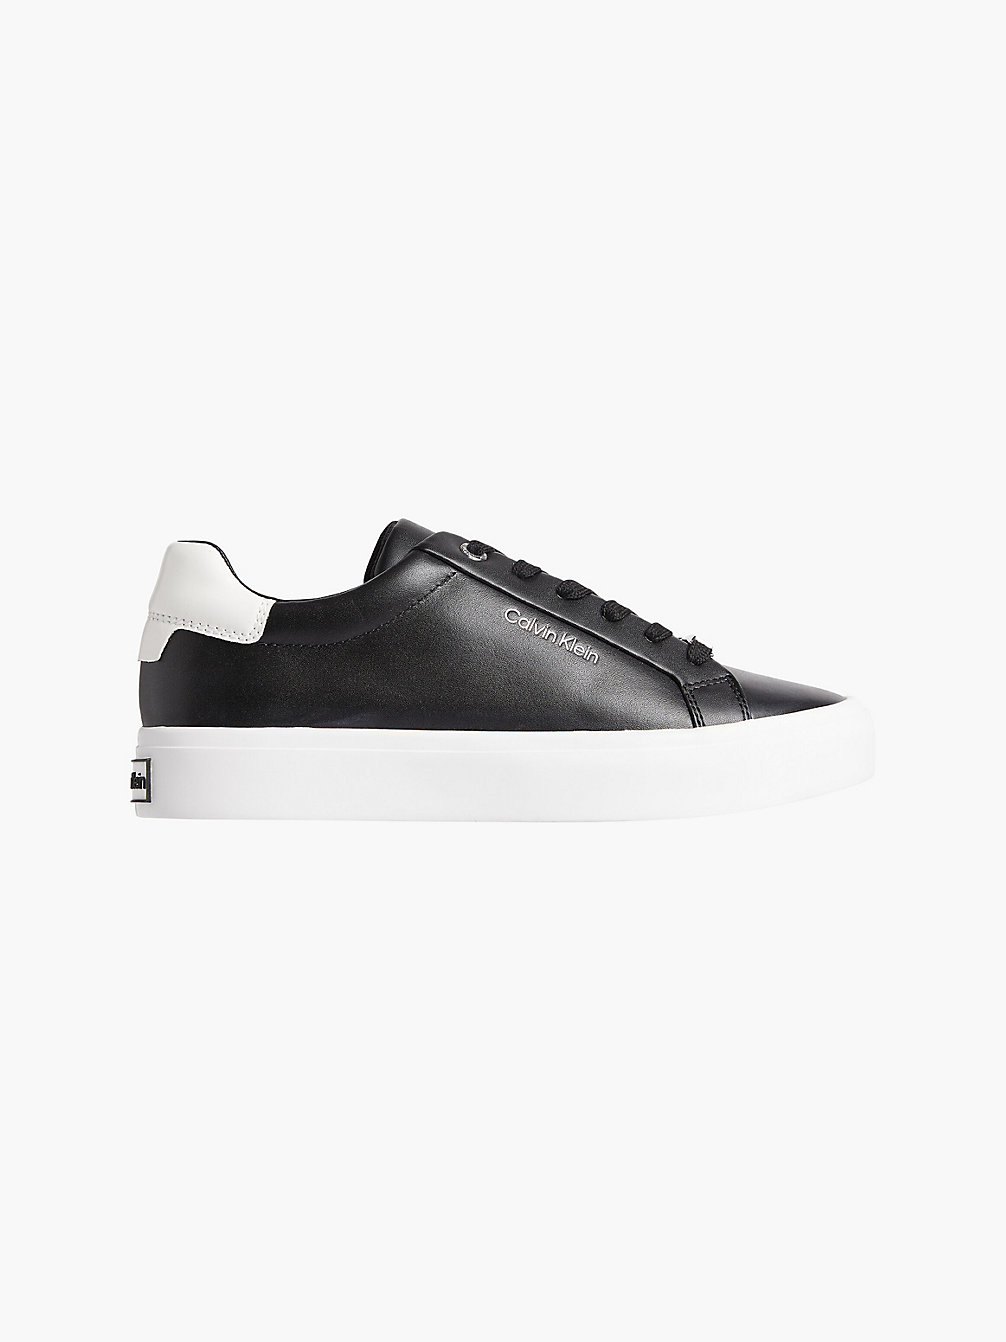 BLACK / WHITE Leather Trainers undefined women Calvin Klein